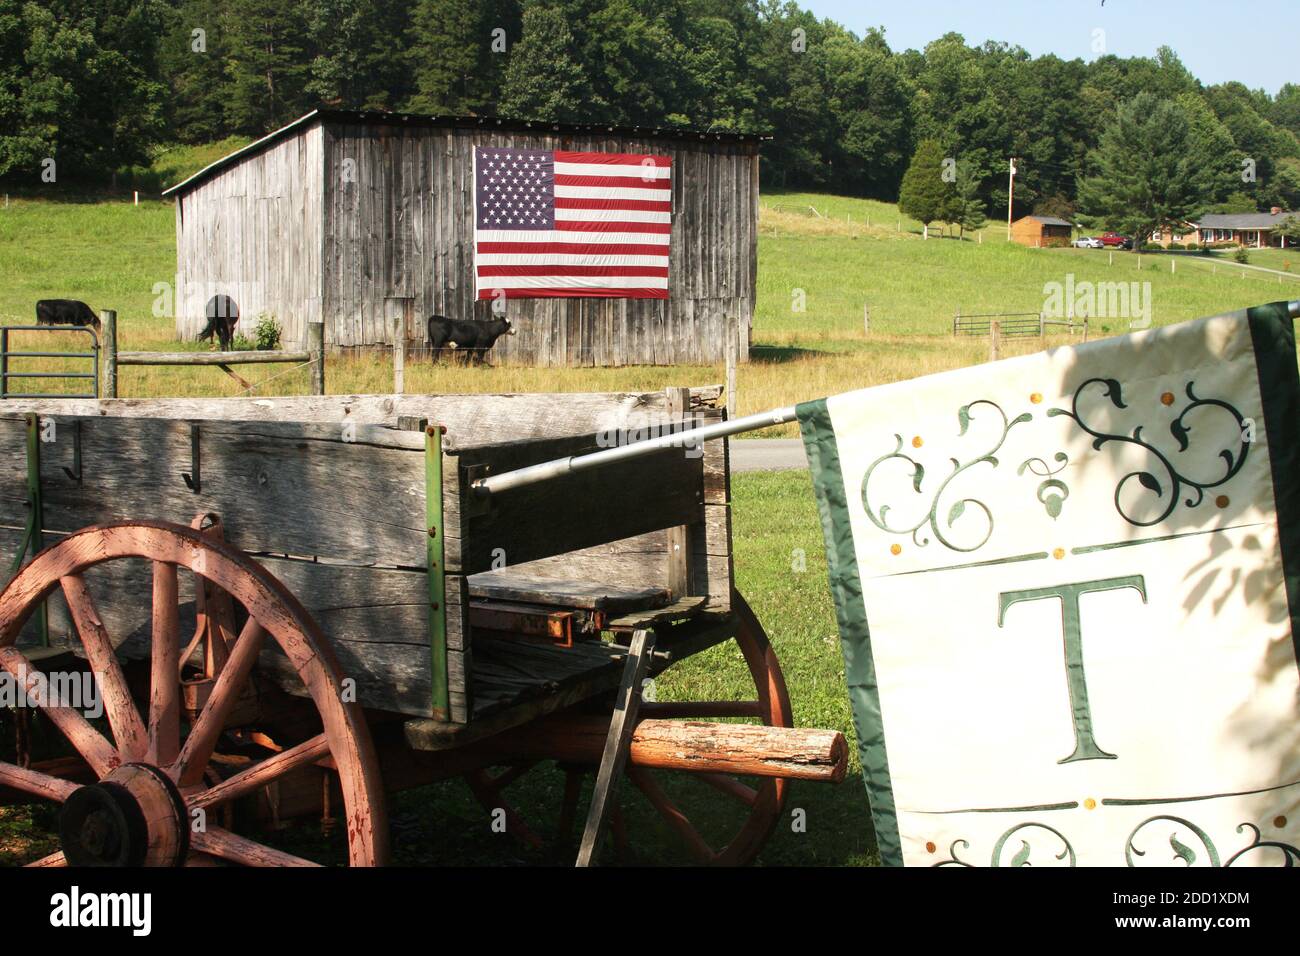 Virginia, USA. American flag displayed on an wooden shed. Old cart with flag used as yard decor. Stock Photo